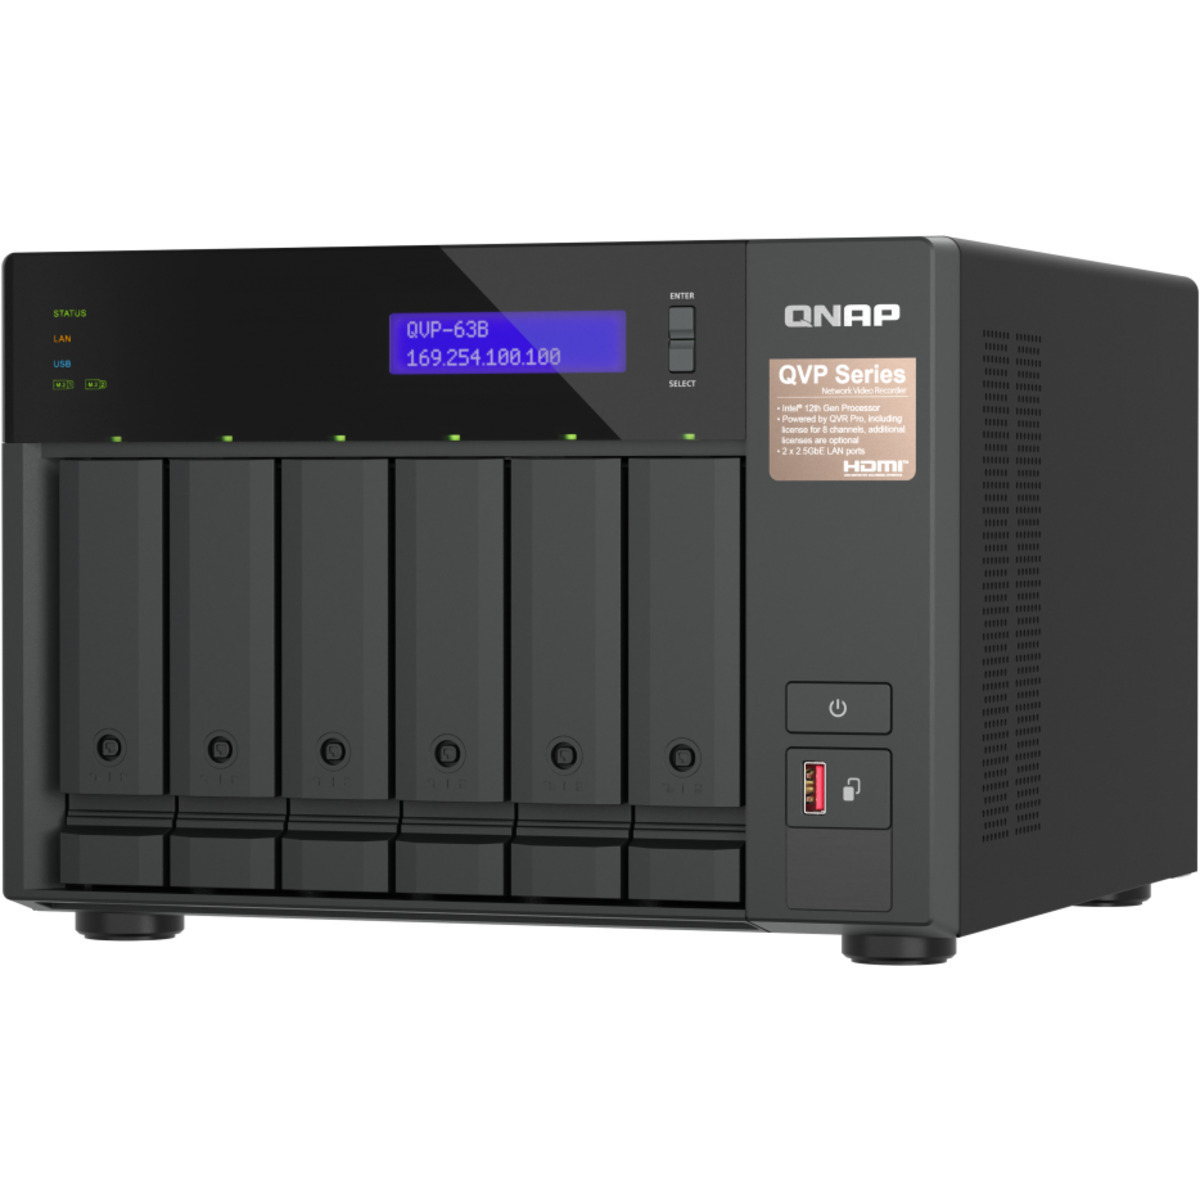 QNAP QVP-63B NVR - Network Video Recorder Burn-In Tested Configurations